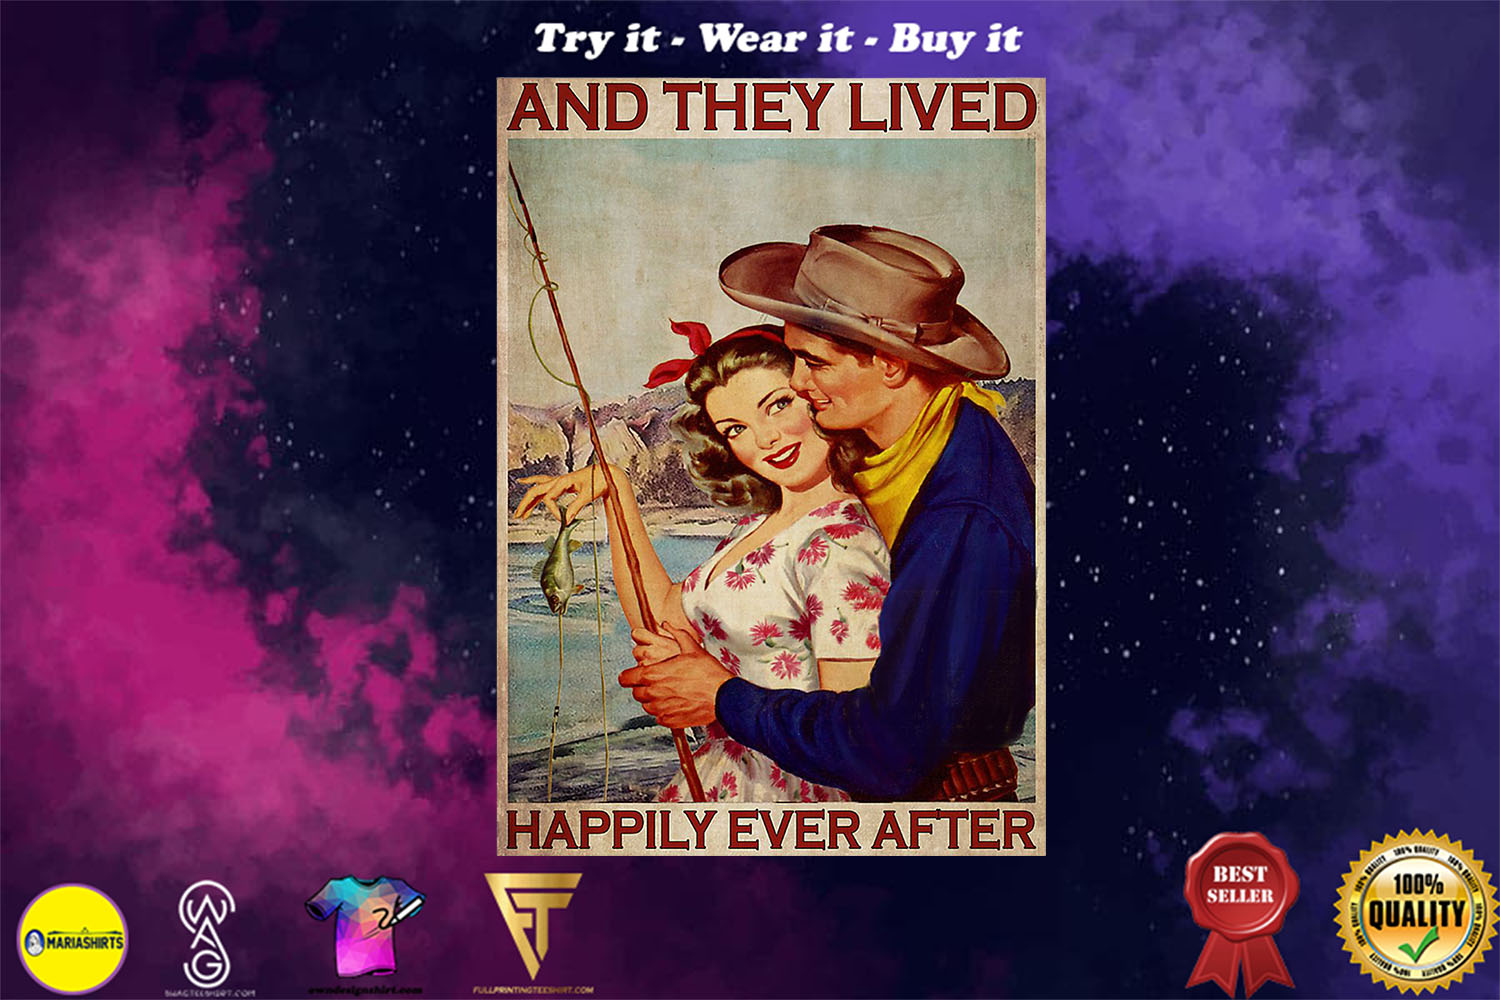 fishing couple and they lived happily ever after vintage poster